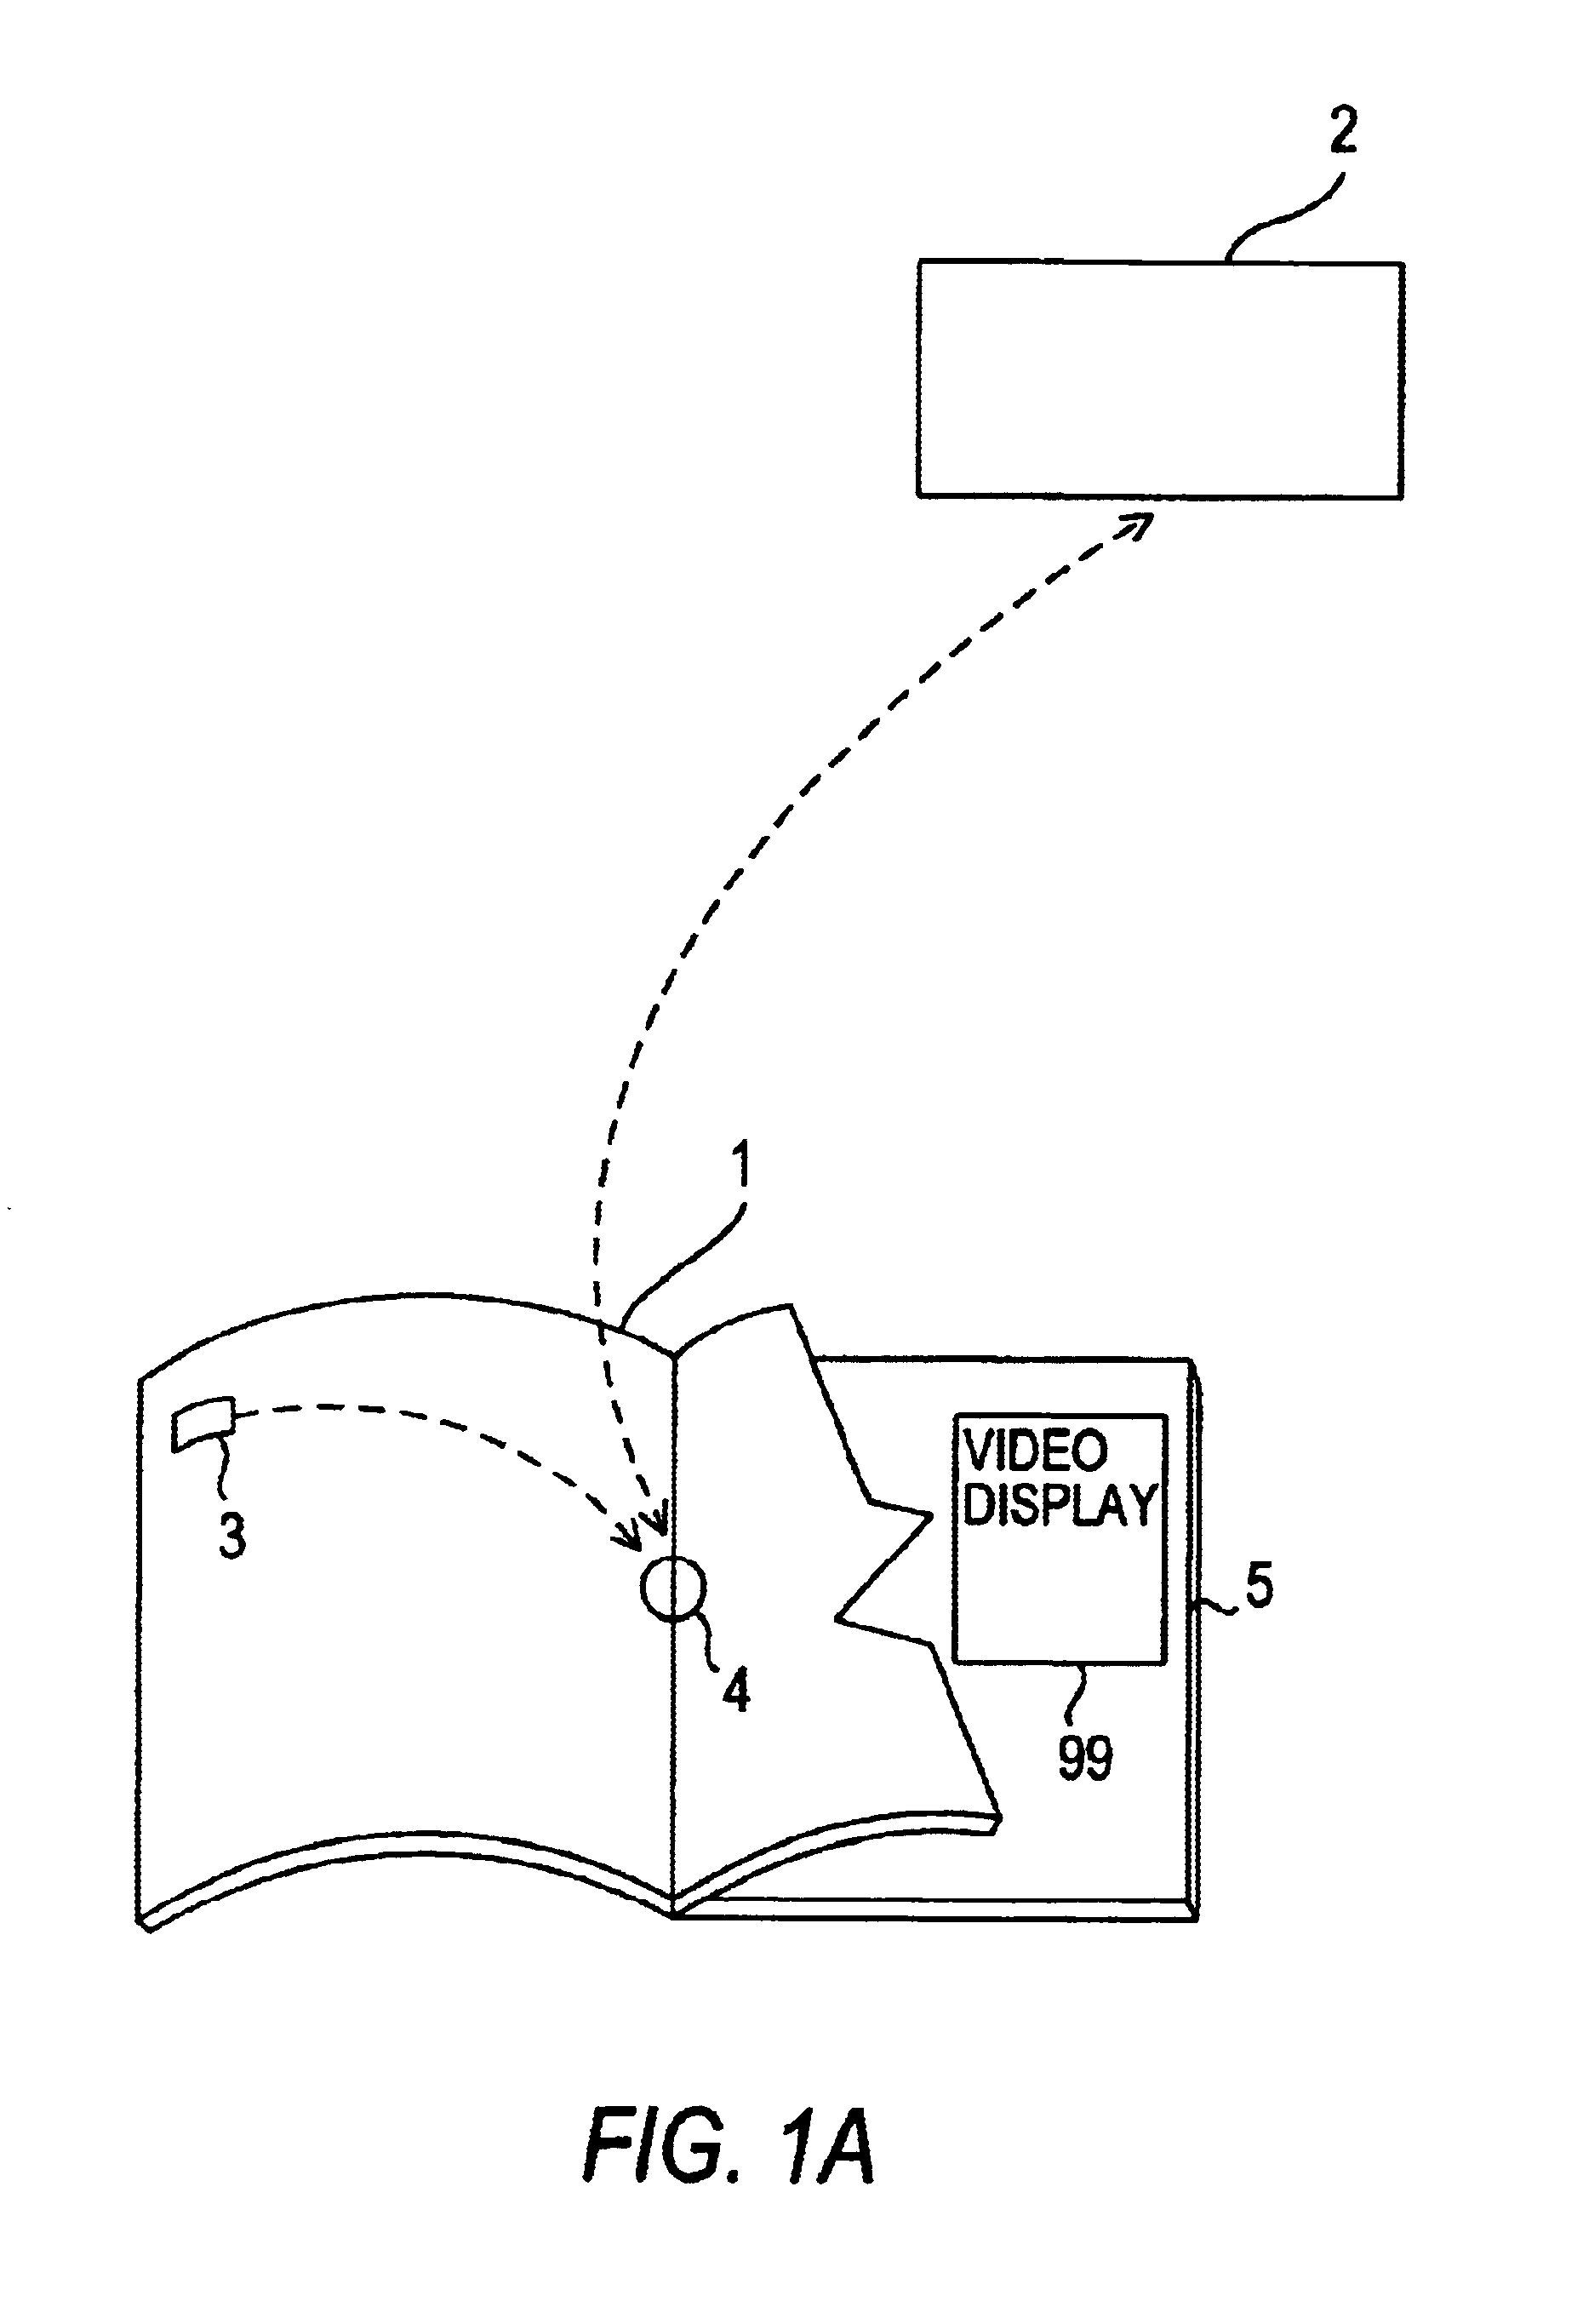 Method and apparatus for accessing electronic data via a familiar printed medium